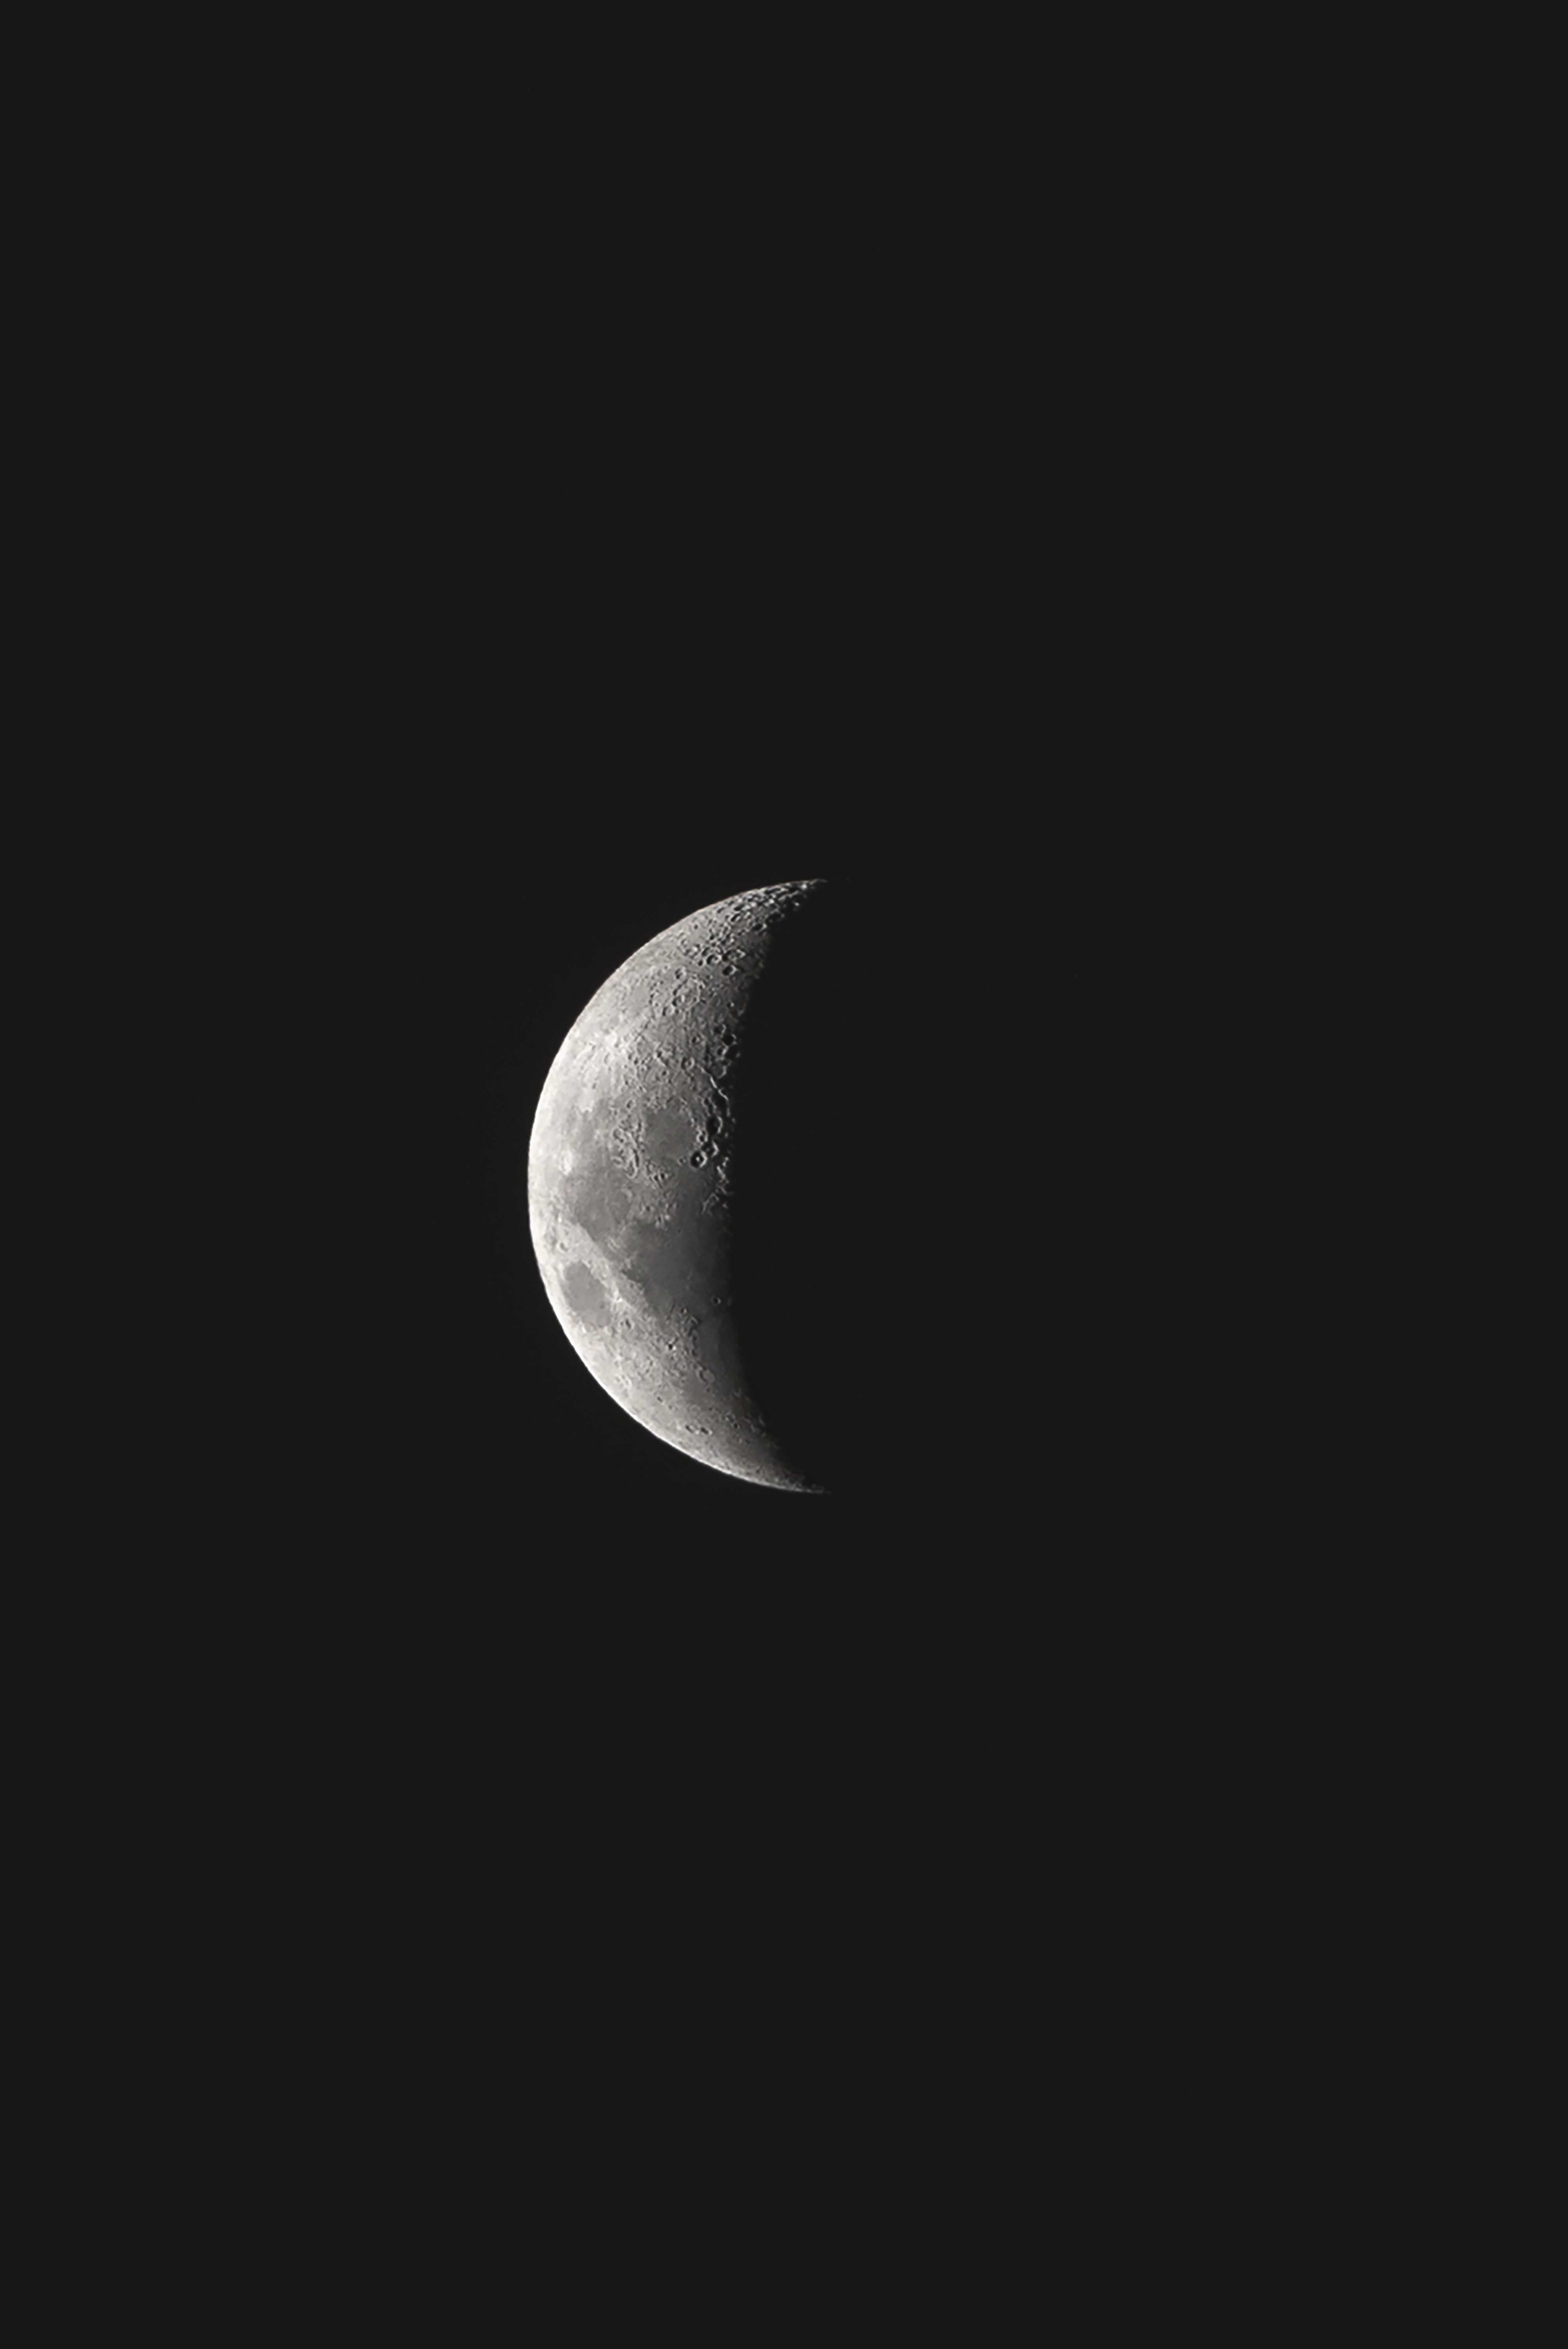 The moon in black and white - Black